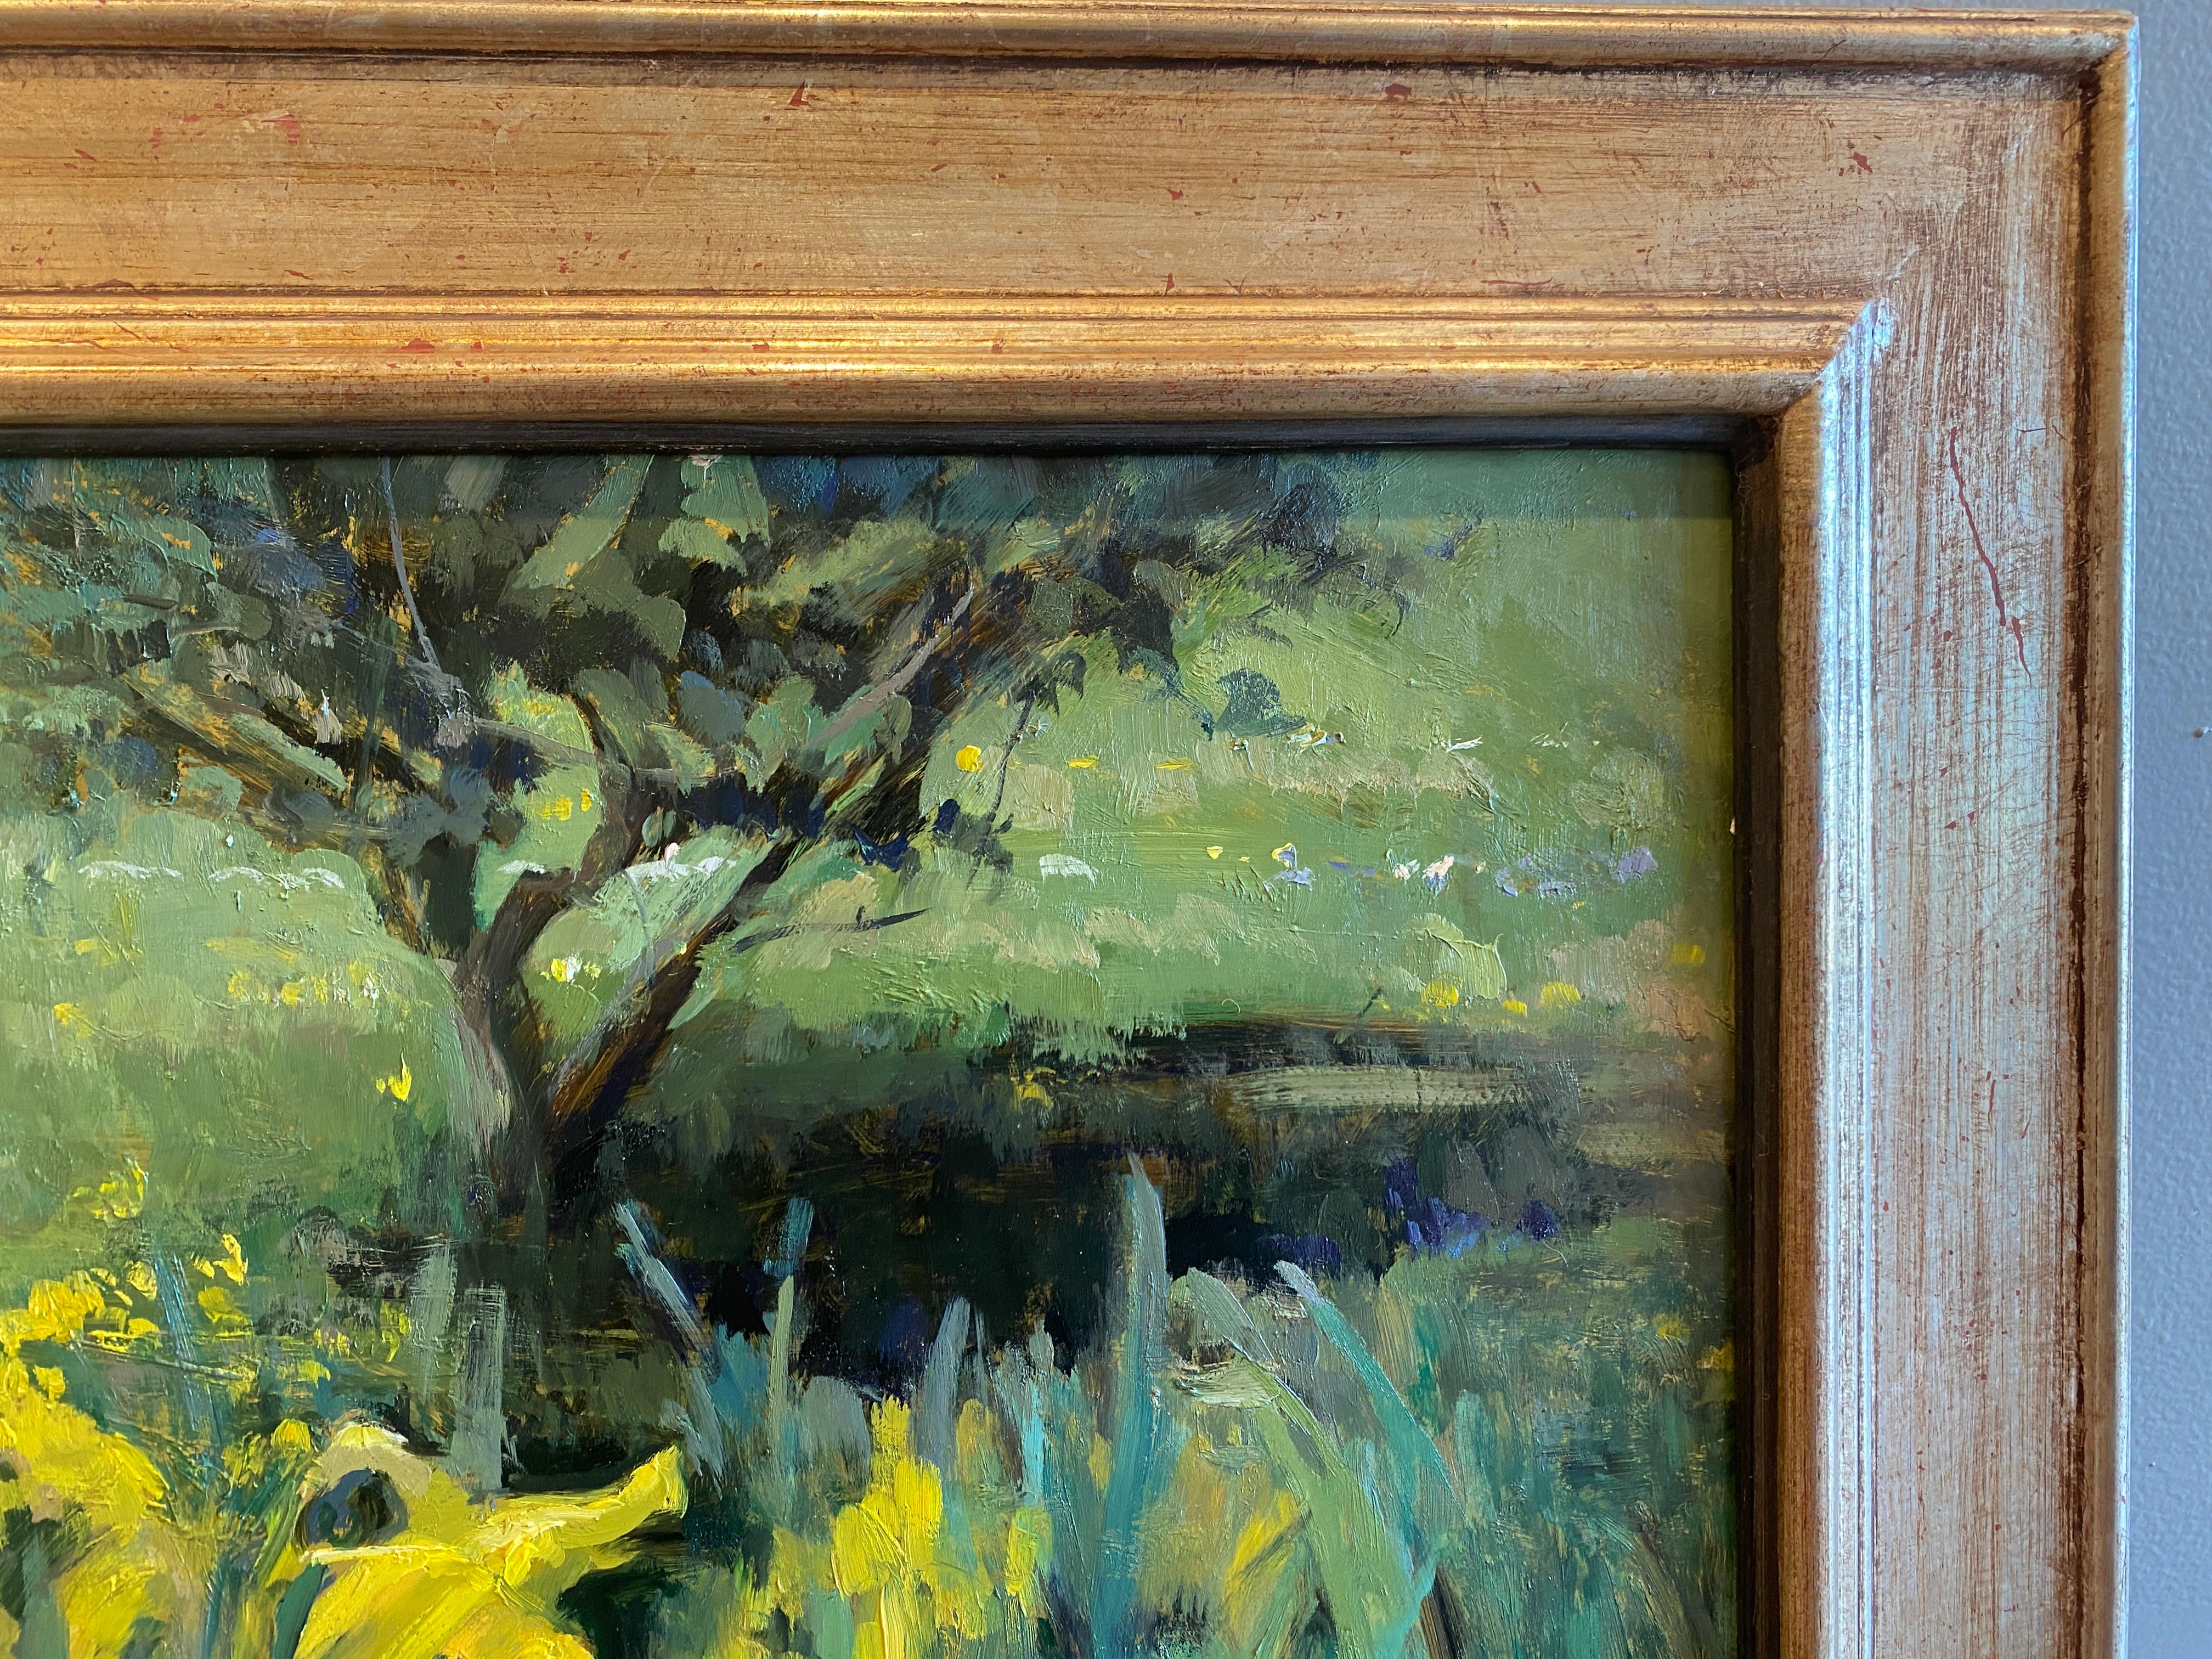 A luminous close-up of blooming daffodils at the artist's home in Fiesole, Italy. The scene is painted with oil paint, on a brass panel, which results in a warm undertone, and semi-reflective quality to the surface. Within the bed of flowers, the